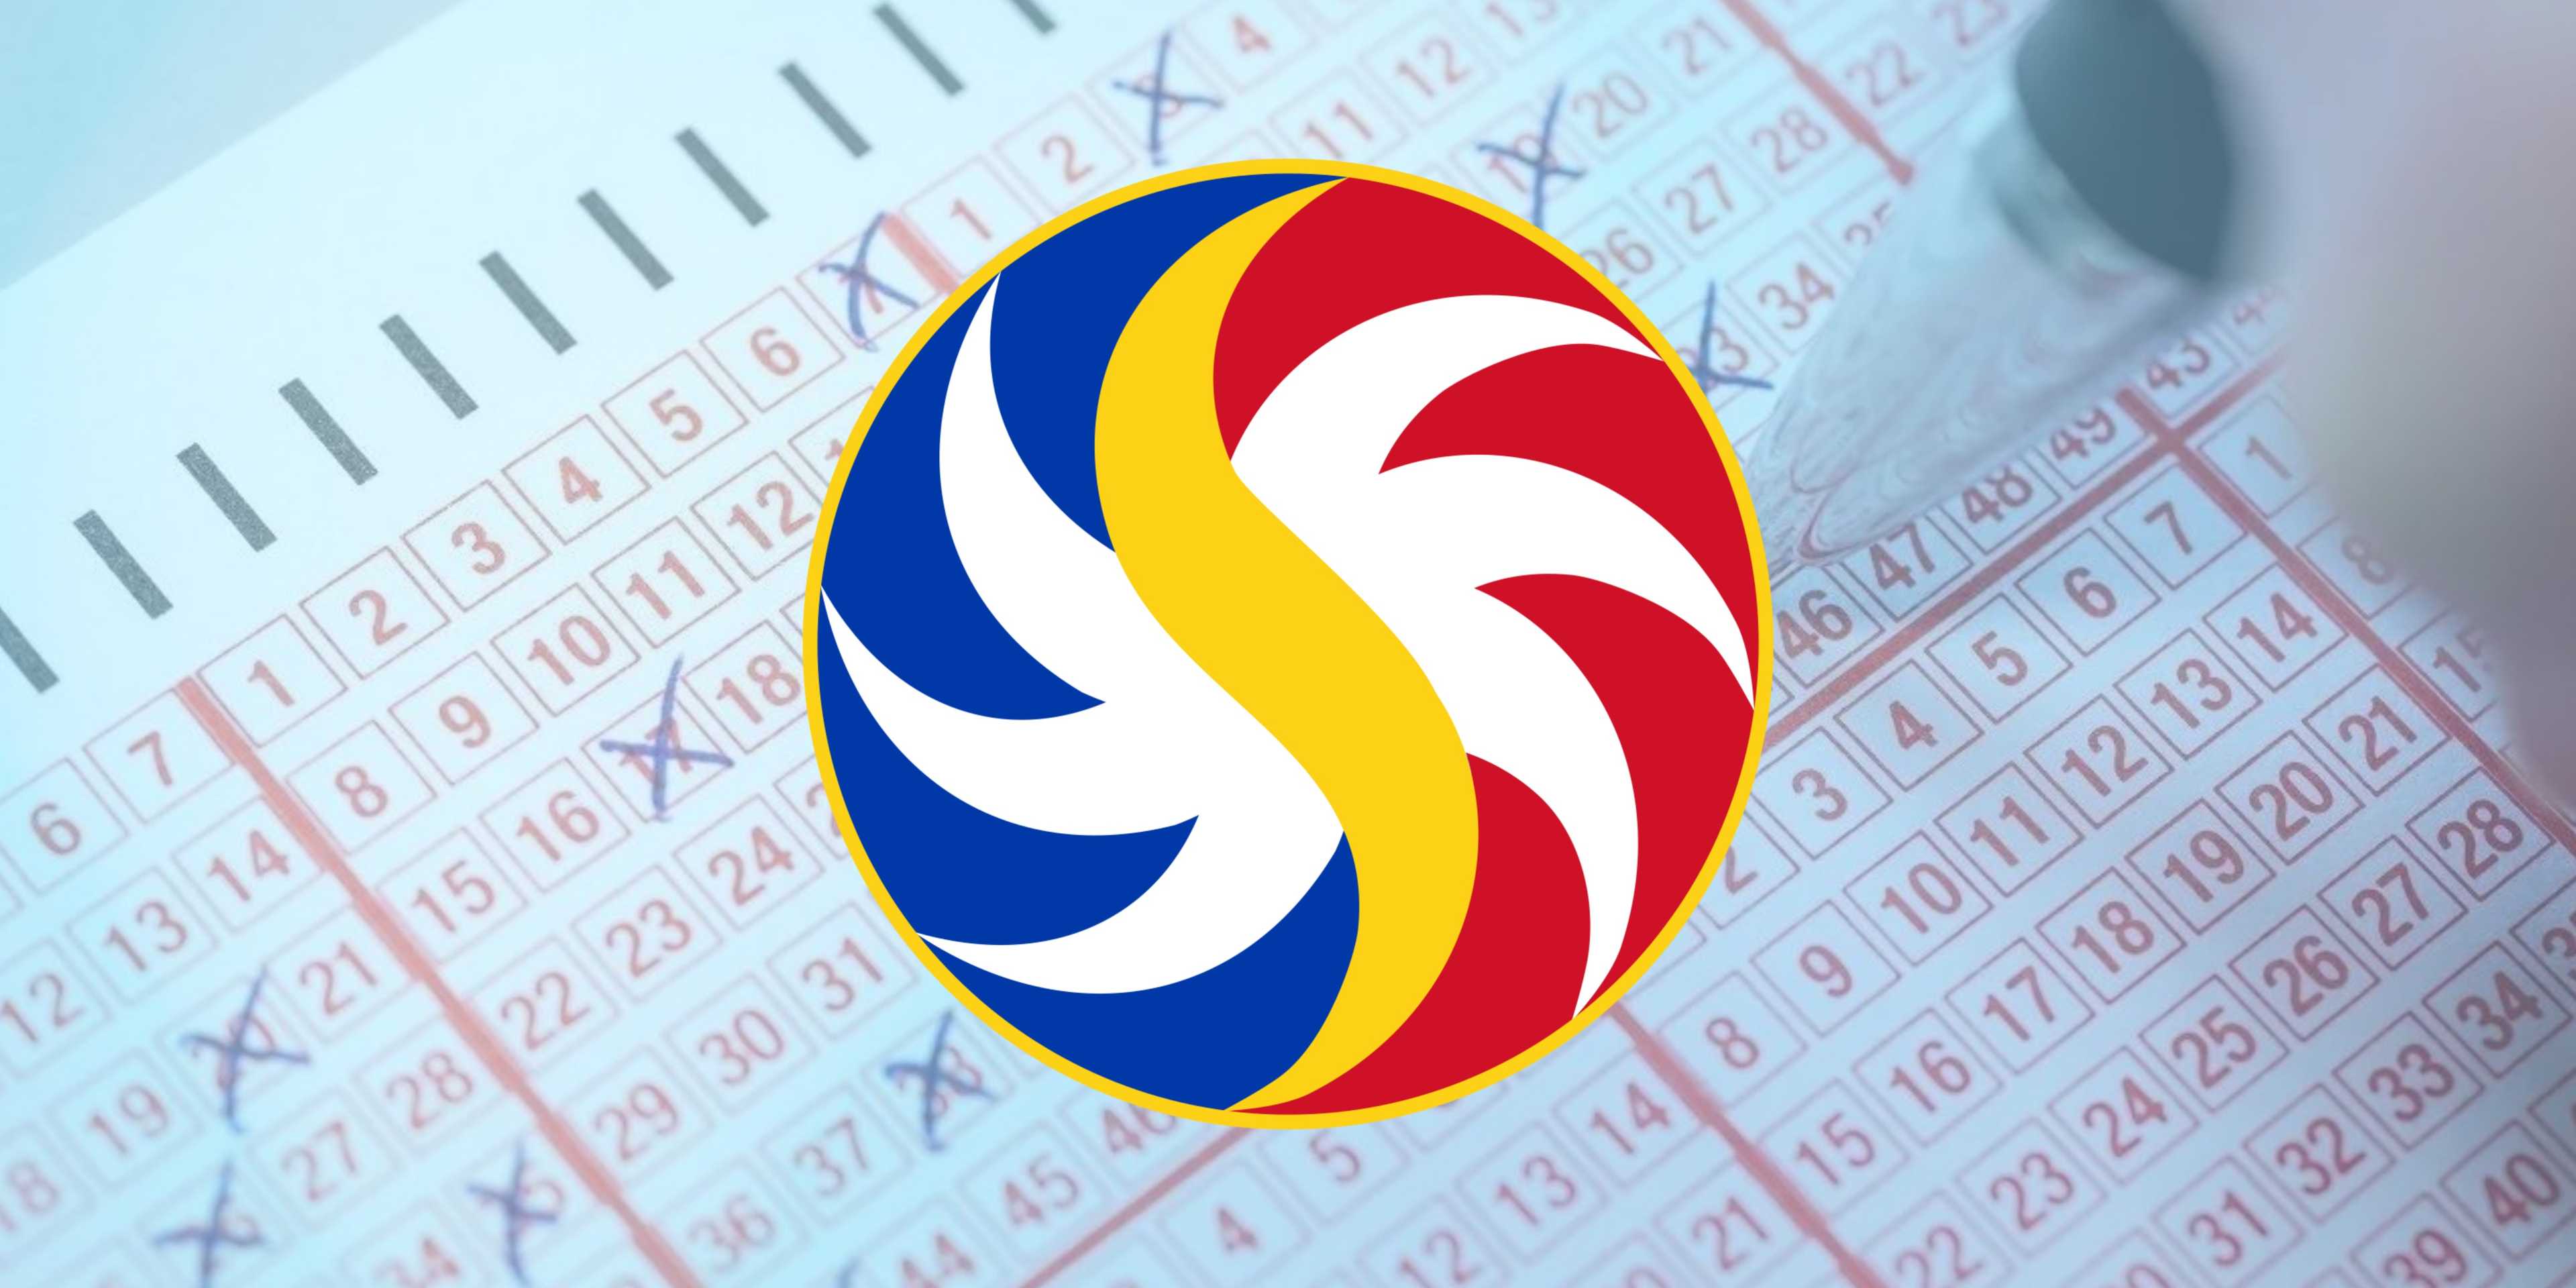 PCSO Lotto Draw Results on Friday, March 1